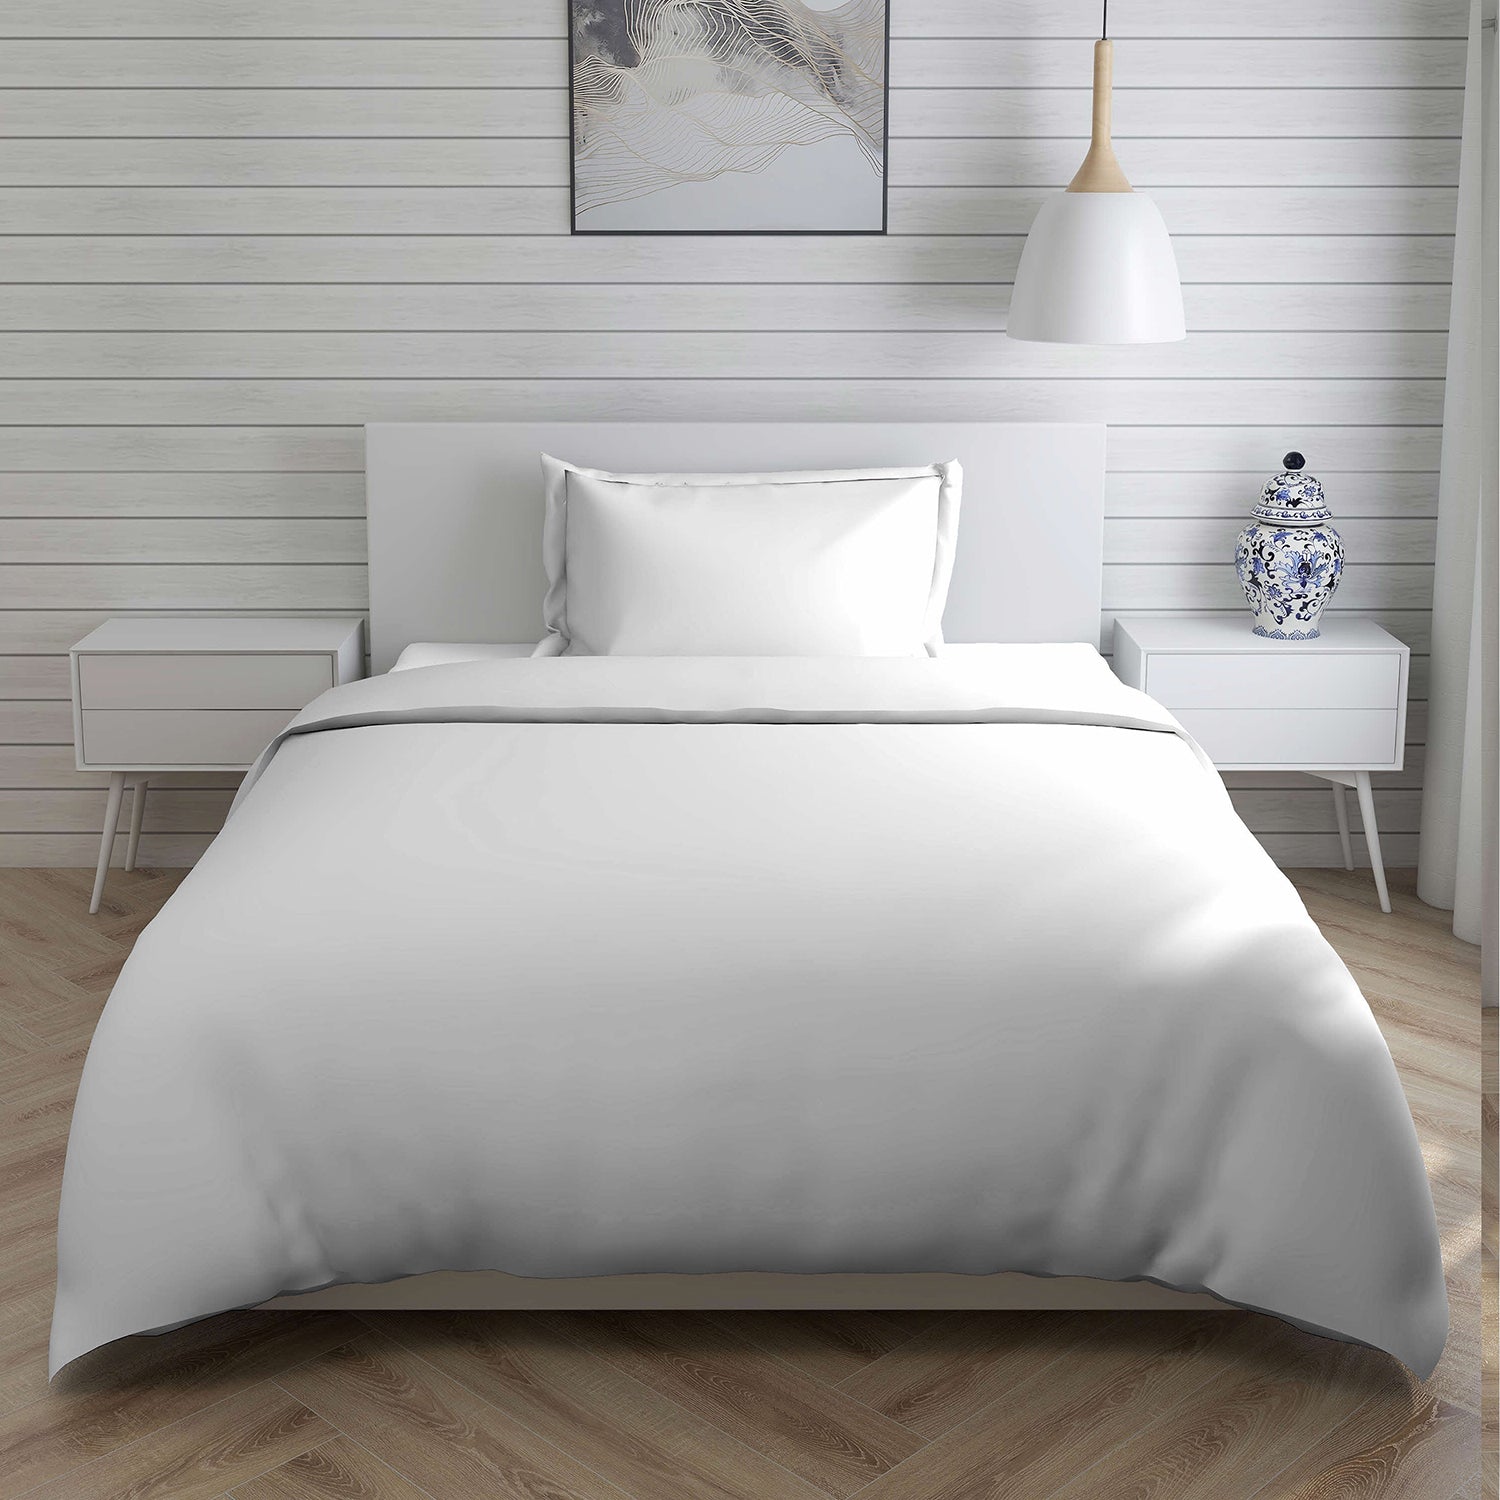 Boutique Living Layers Single Comforter